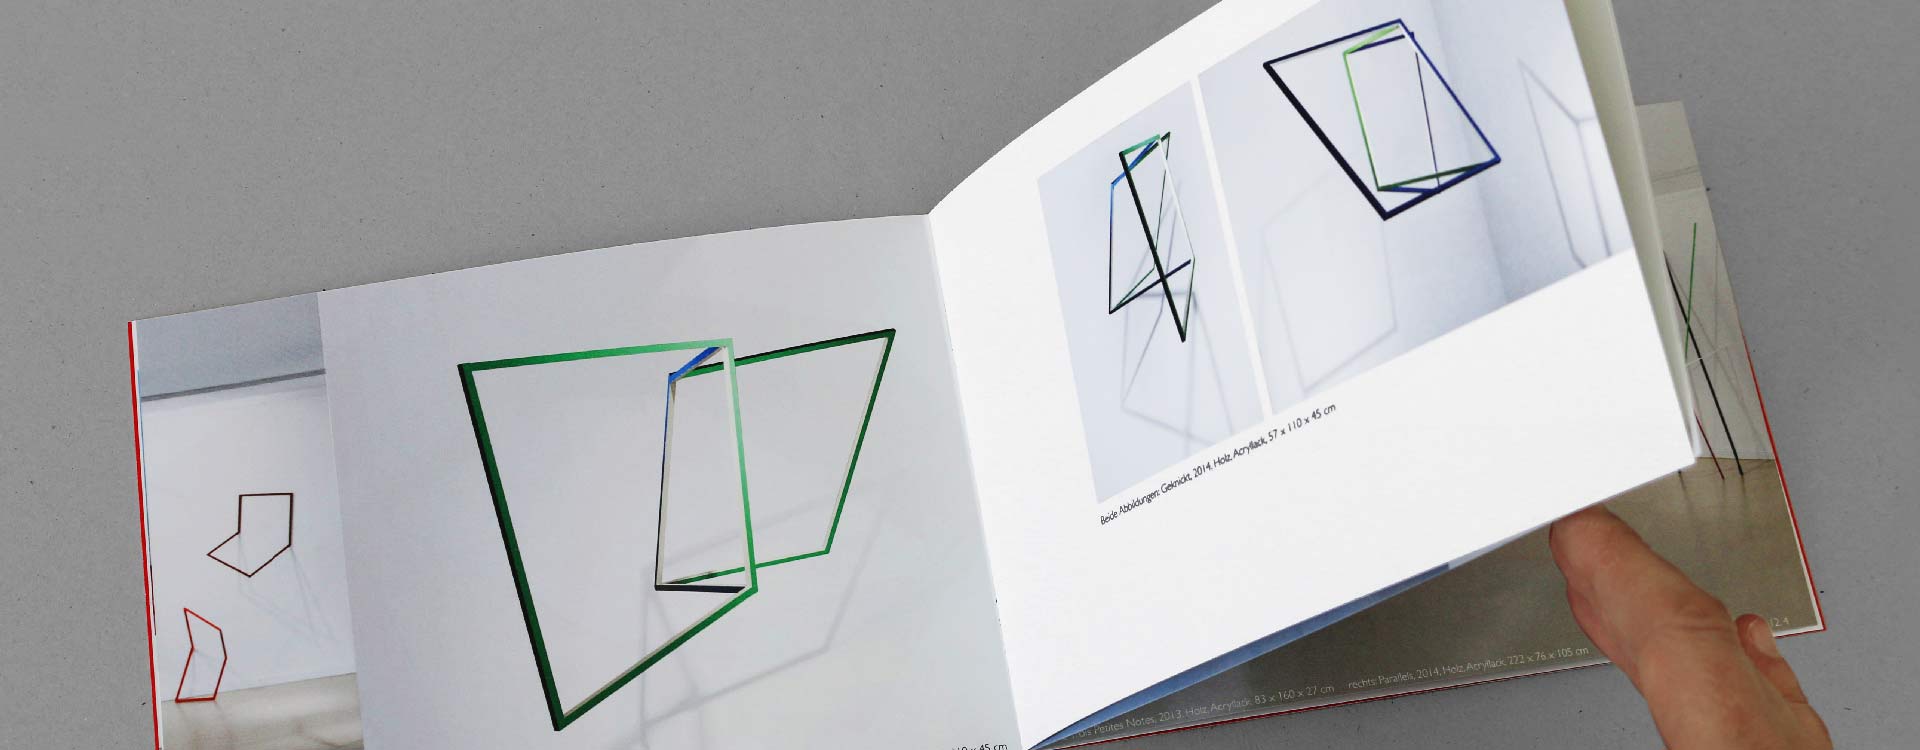 Catalogue Moving Space in the rk Gallery for Contemporary Art, Berlin; Design: Kattrin Richter | Graphic Design Studio